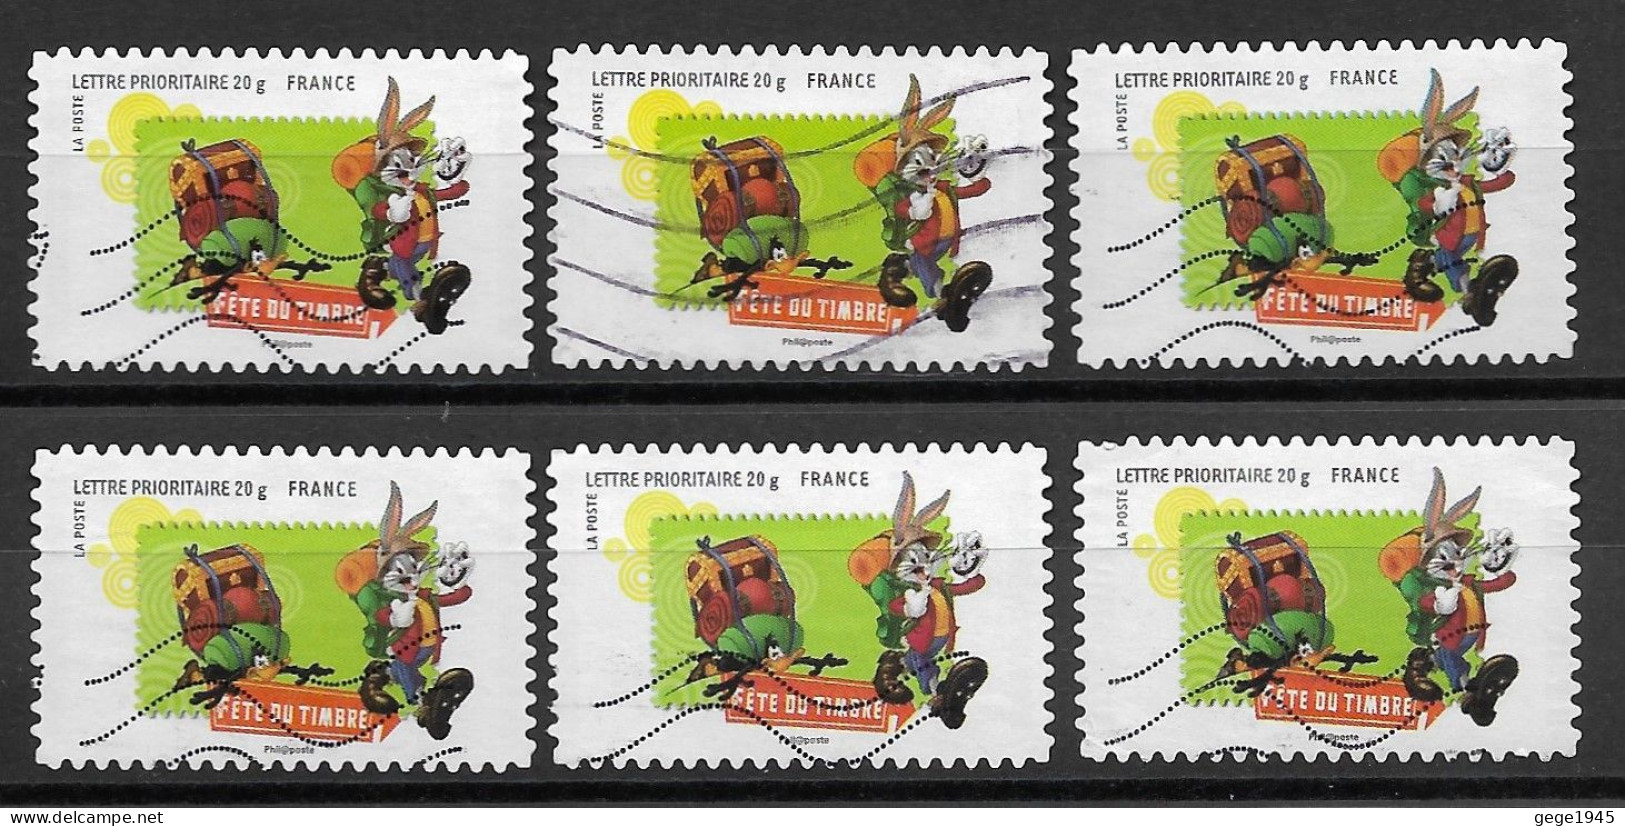 France 2009 Oblitéré Autoadhésif   N° 270   Personnages  Looney Tunes   " Bugs Bunny "   ( 6  Exemplaires ) - Used Stamps